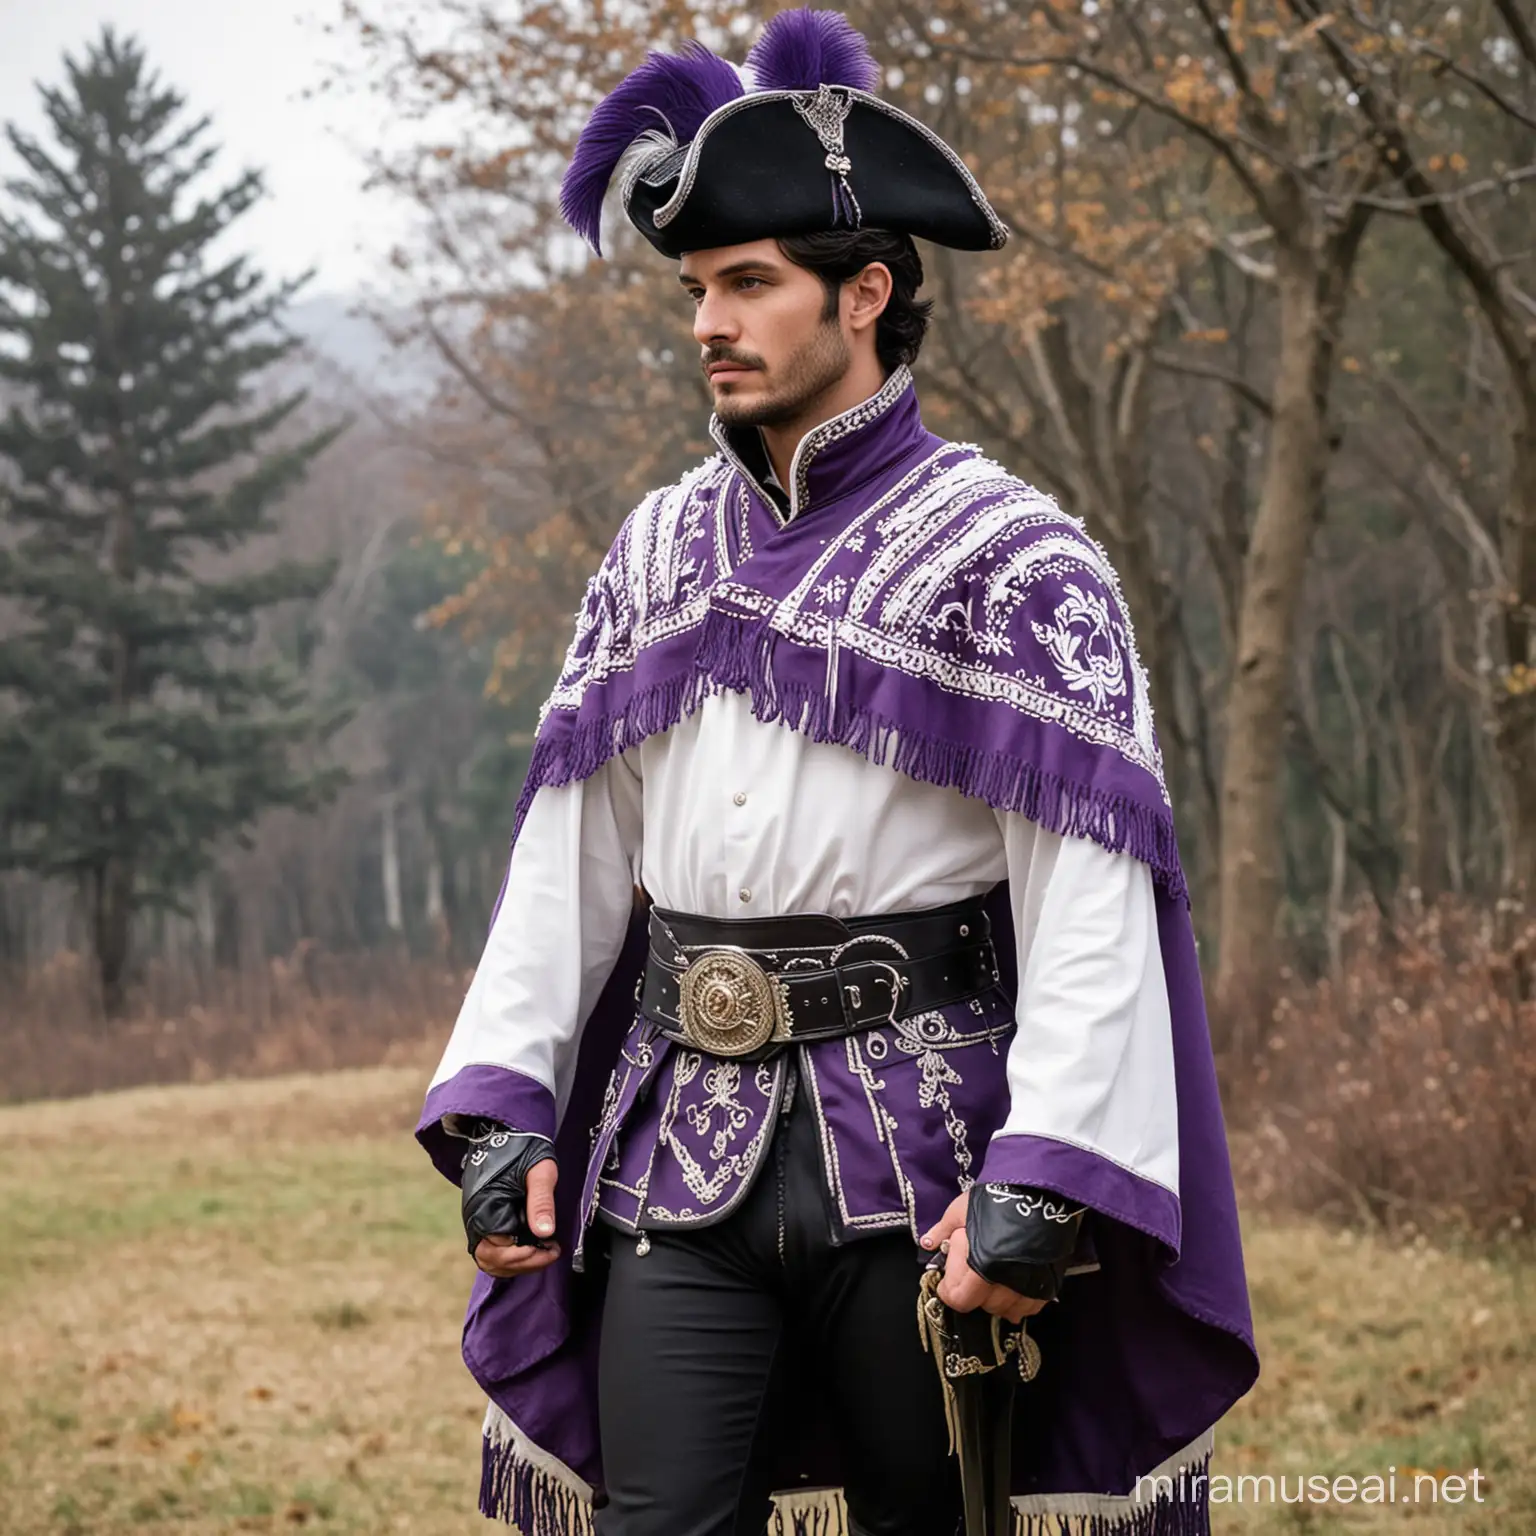 Man with dark hair, wearing a purple hussar dolman with white trimmings, He covers his jacket with a poncho, white saber belt, black pants and riding boots. On his head he wears a hussar's shako.